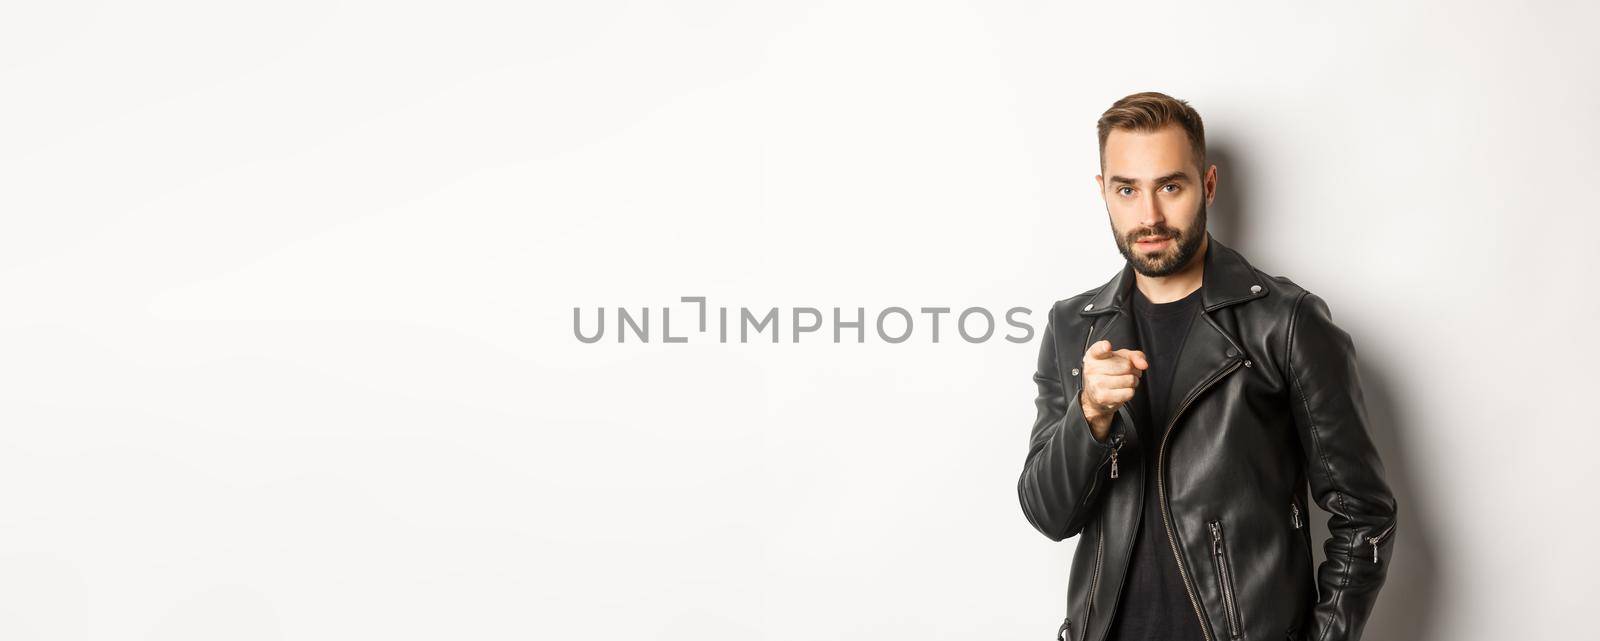 Handsome and cool bearded guy pointing finger at camera, wearing leather jacket, standing sassy against white background.